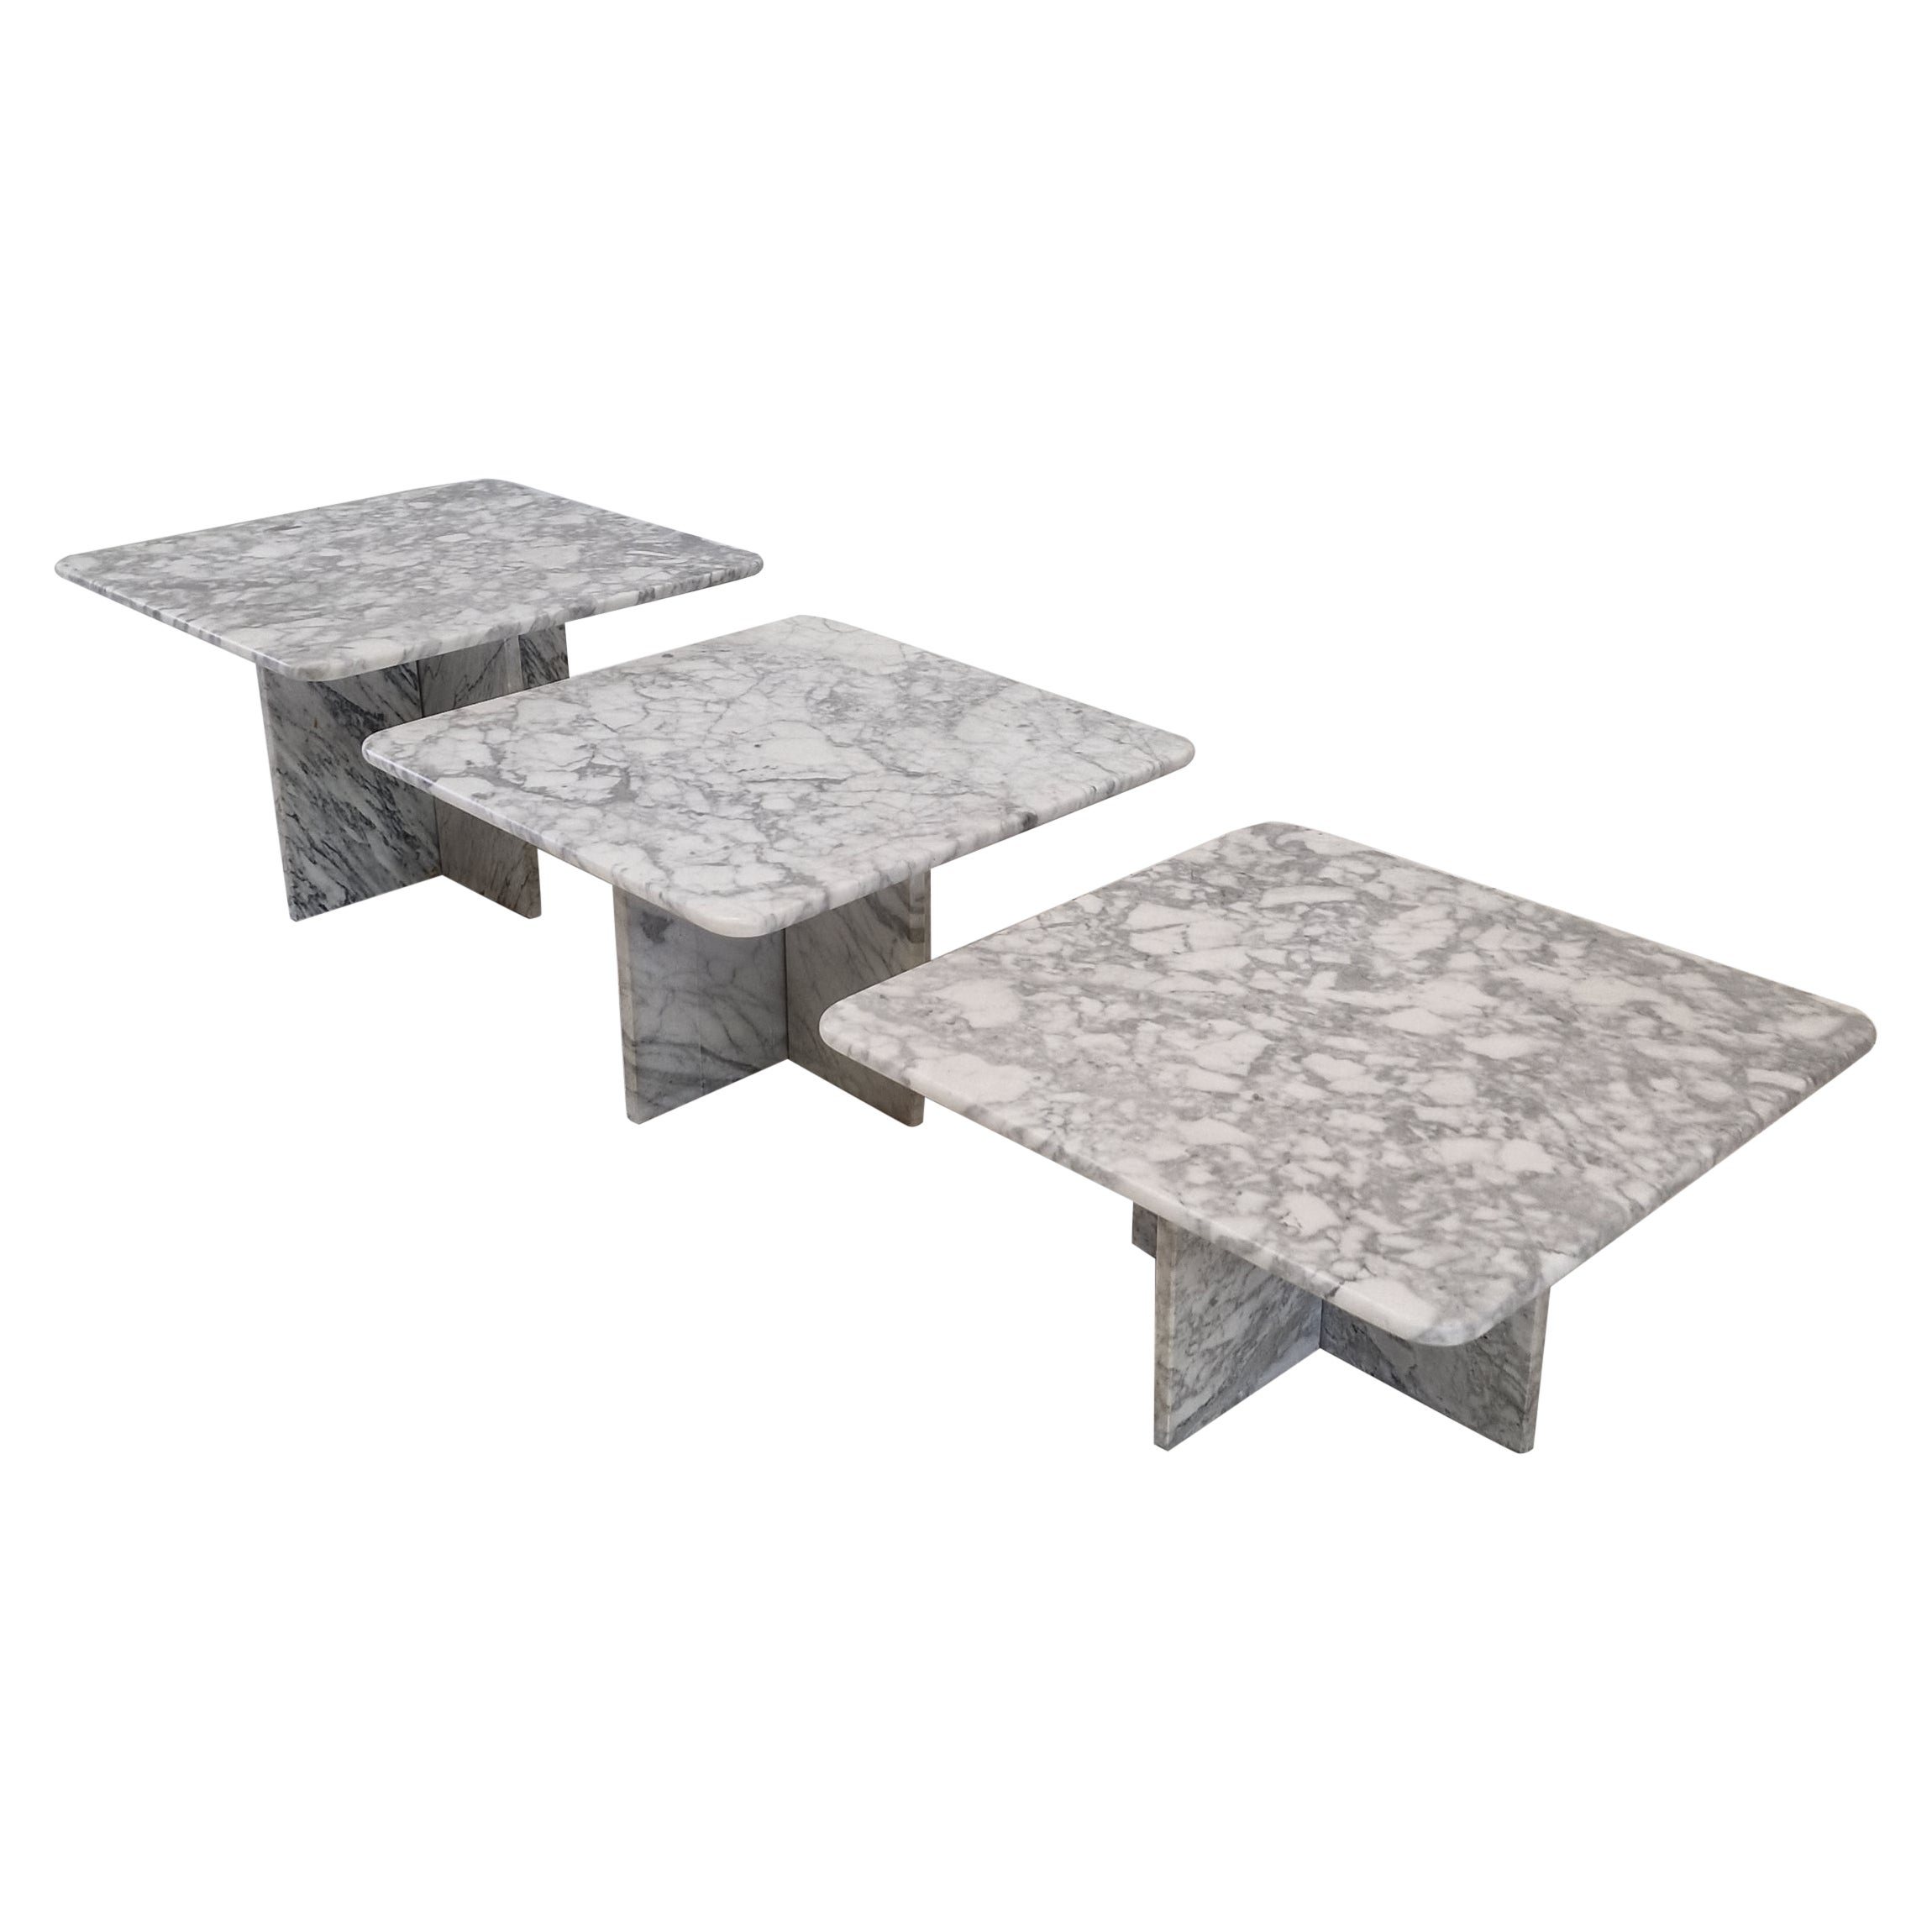 Set of 3 Italian Bianco Carrara Marble Coffee or Side Tables, 1980s For Sale